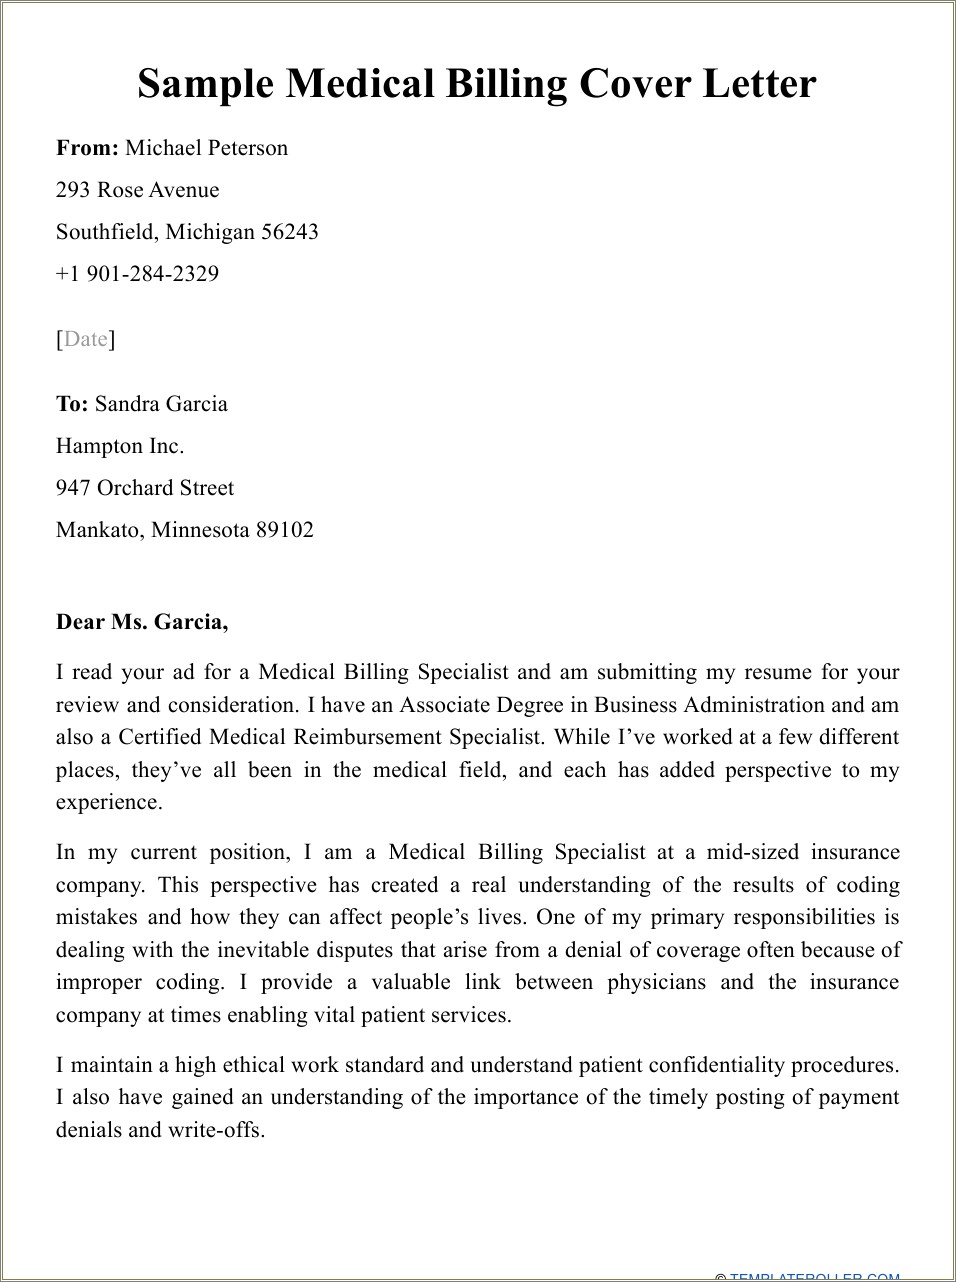 Resume Summary Examples For Medical Biller